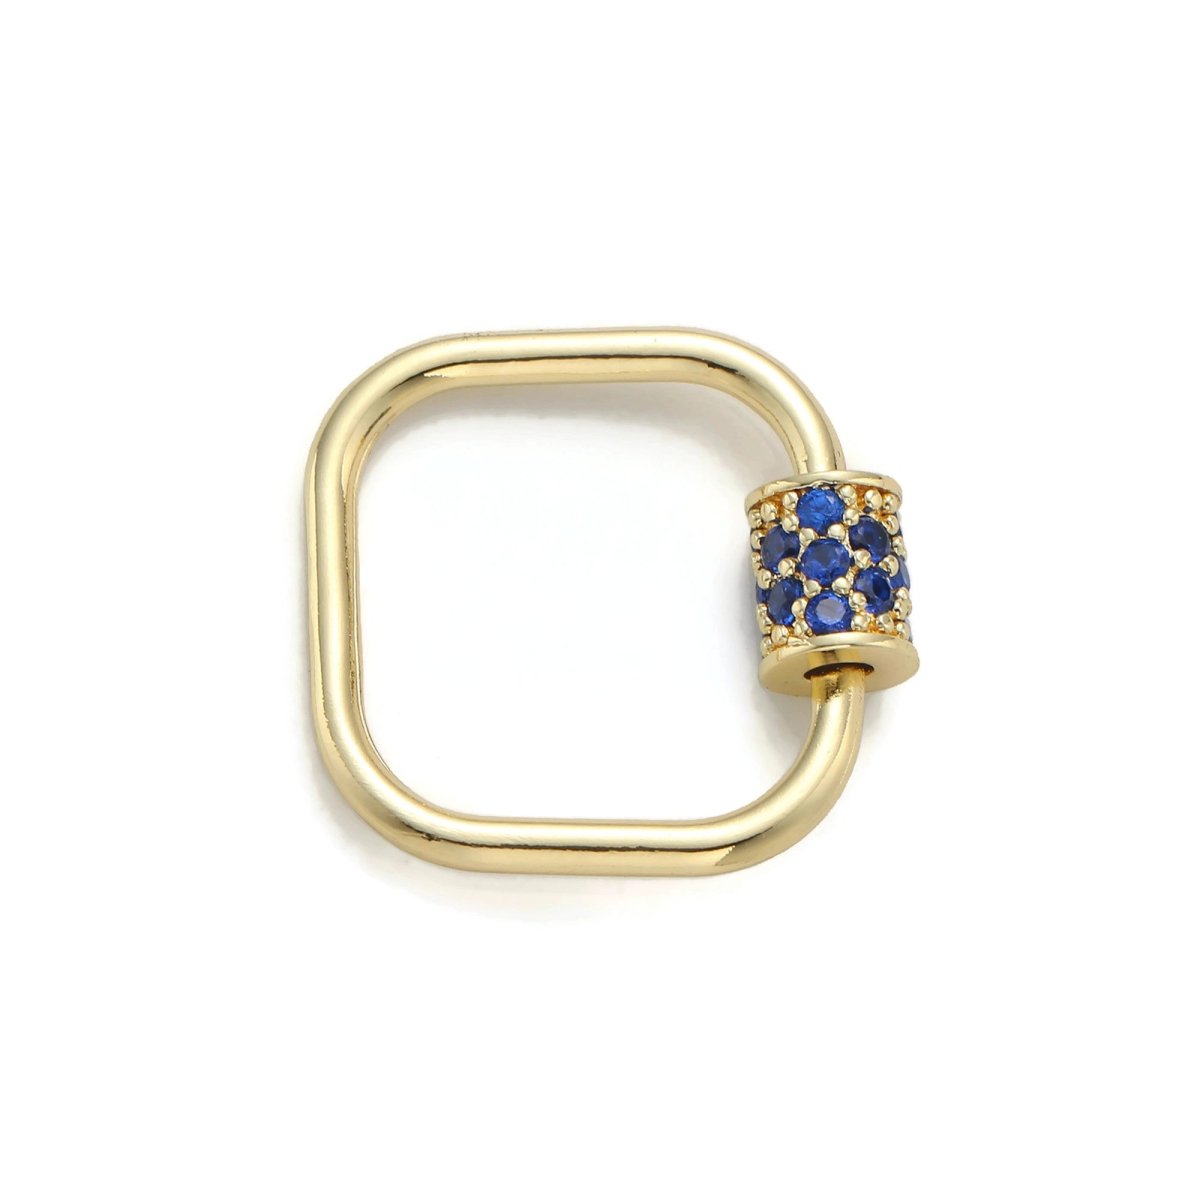 24K Gold-Plated Rounded Square Carabiner, Circular Screw Clasp with Colored Rhinestones - DLUXCA